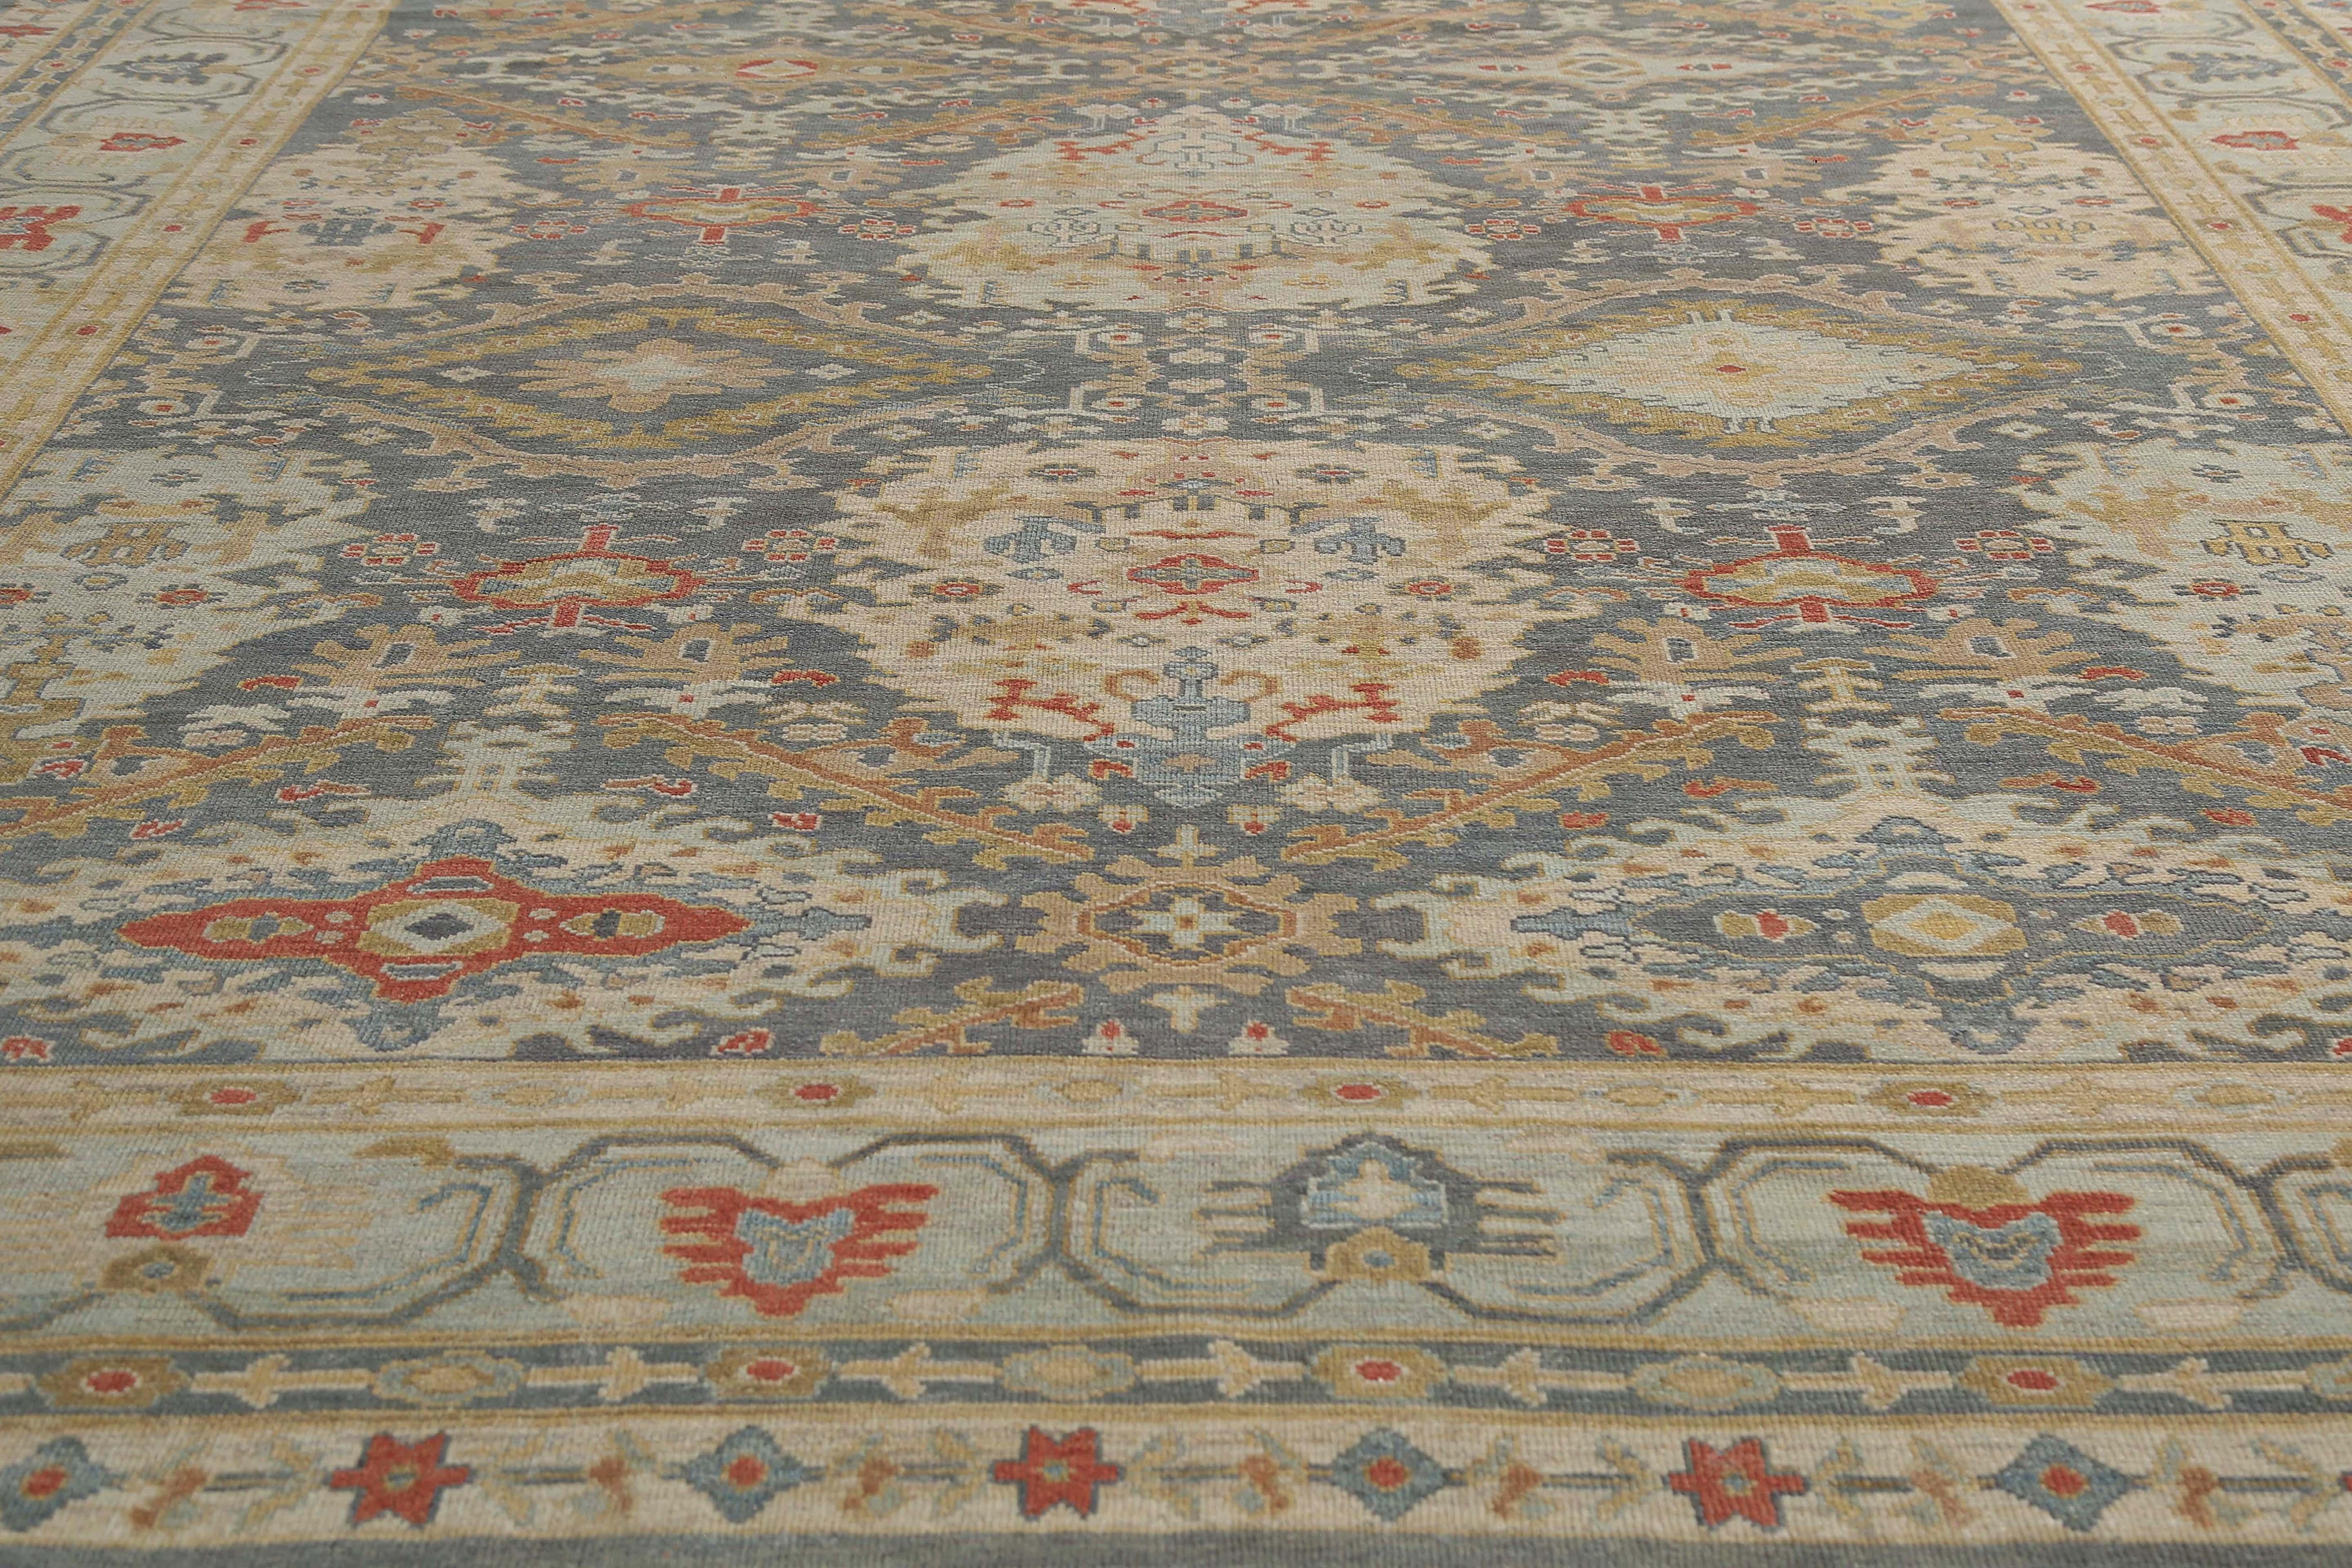 Hand-Woven Handmade Turkish Sultanabad Rug in Blue, Red, and Yellow For Sale